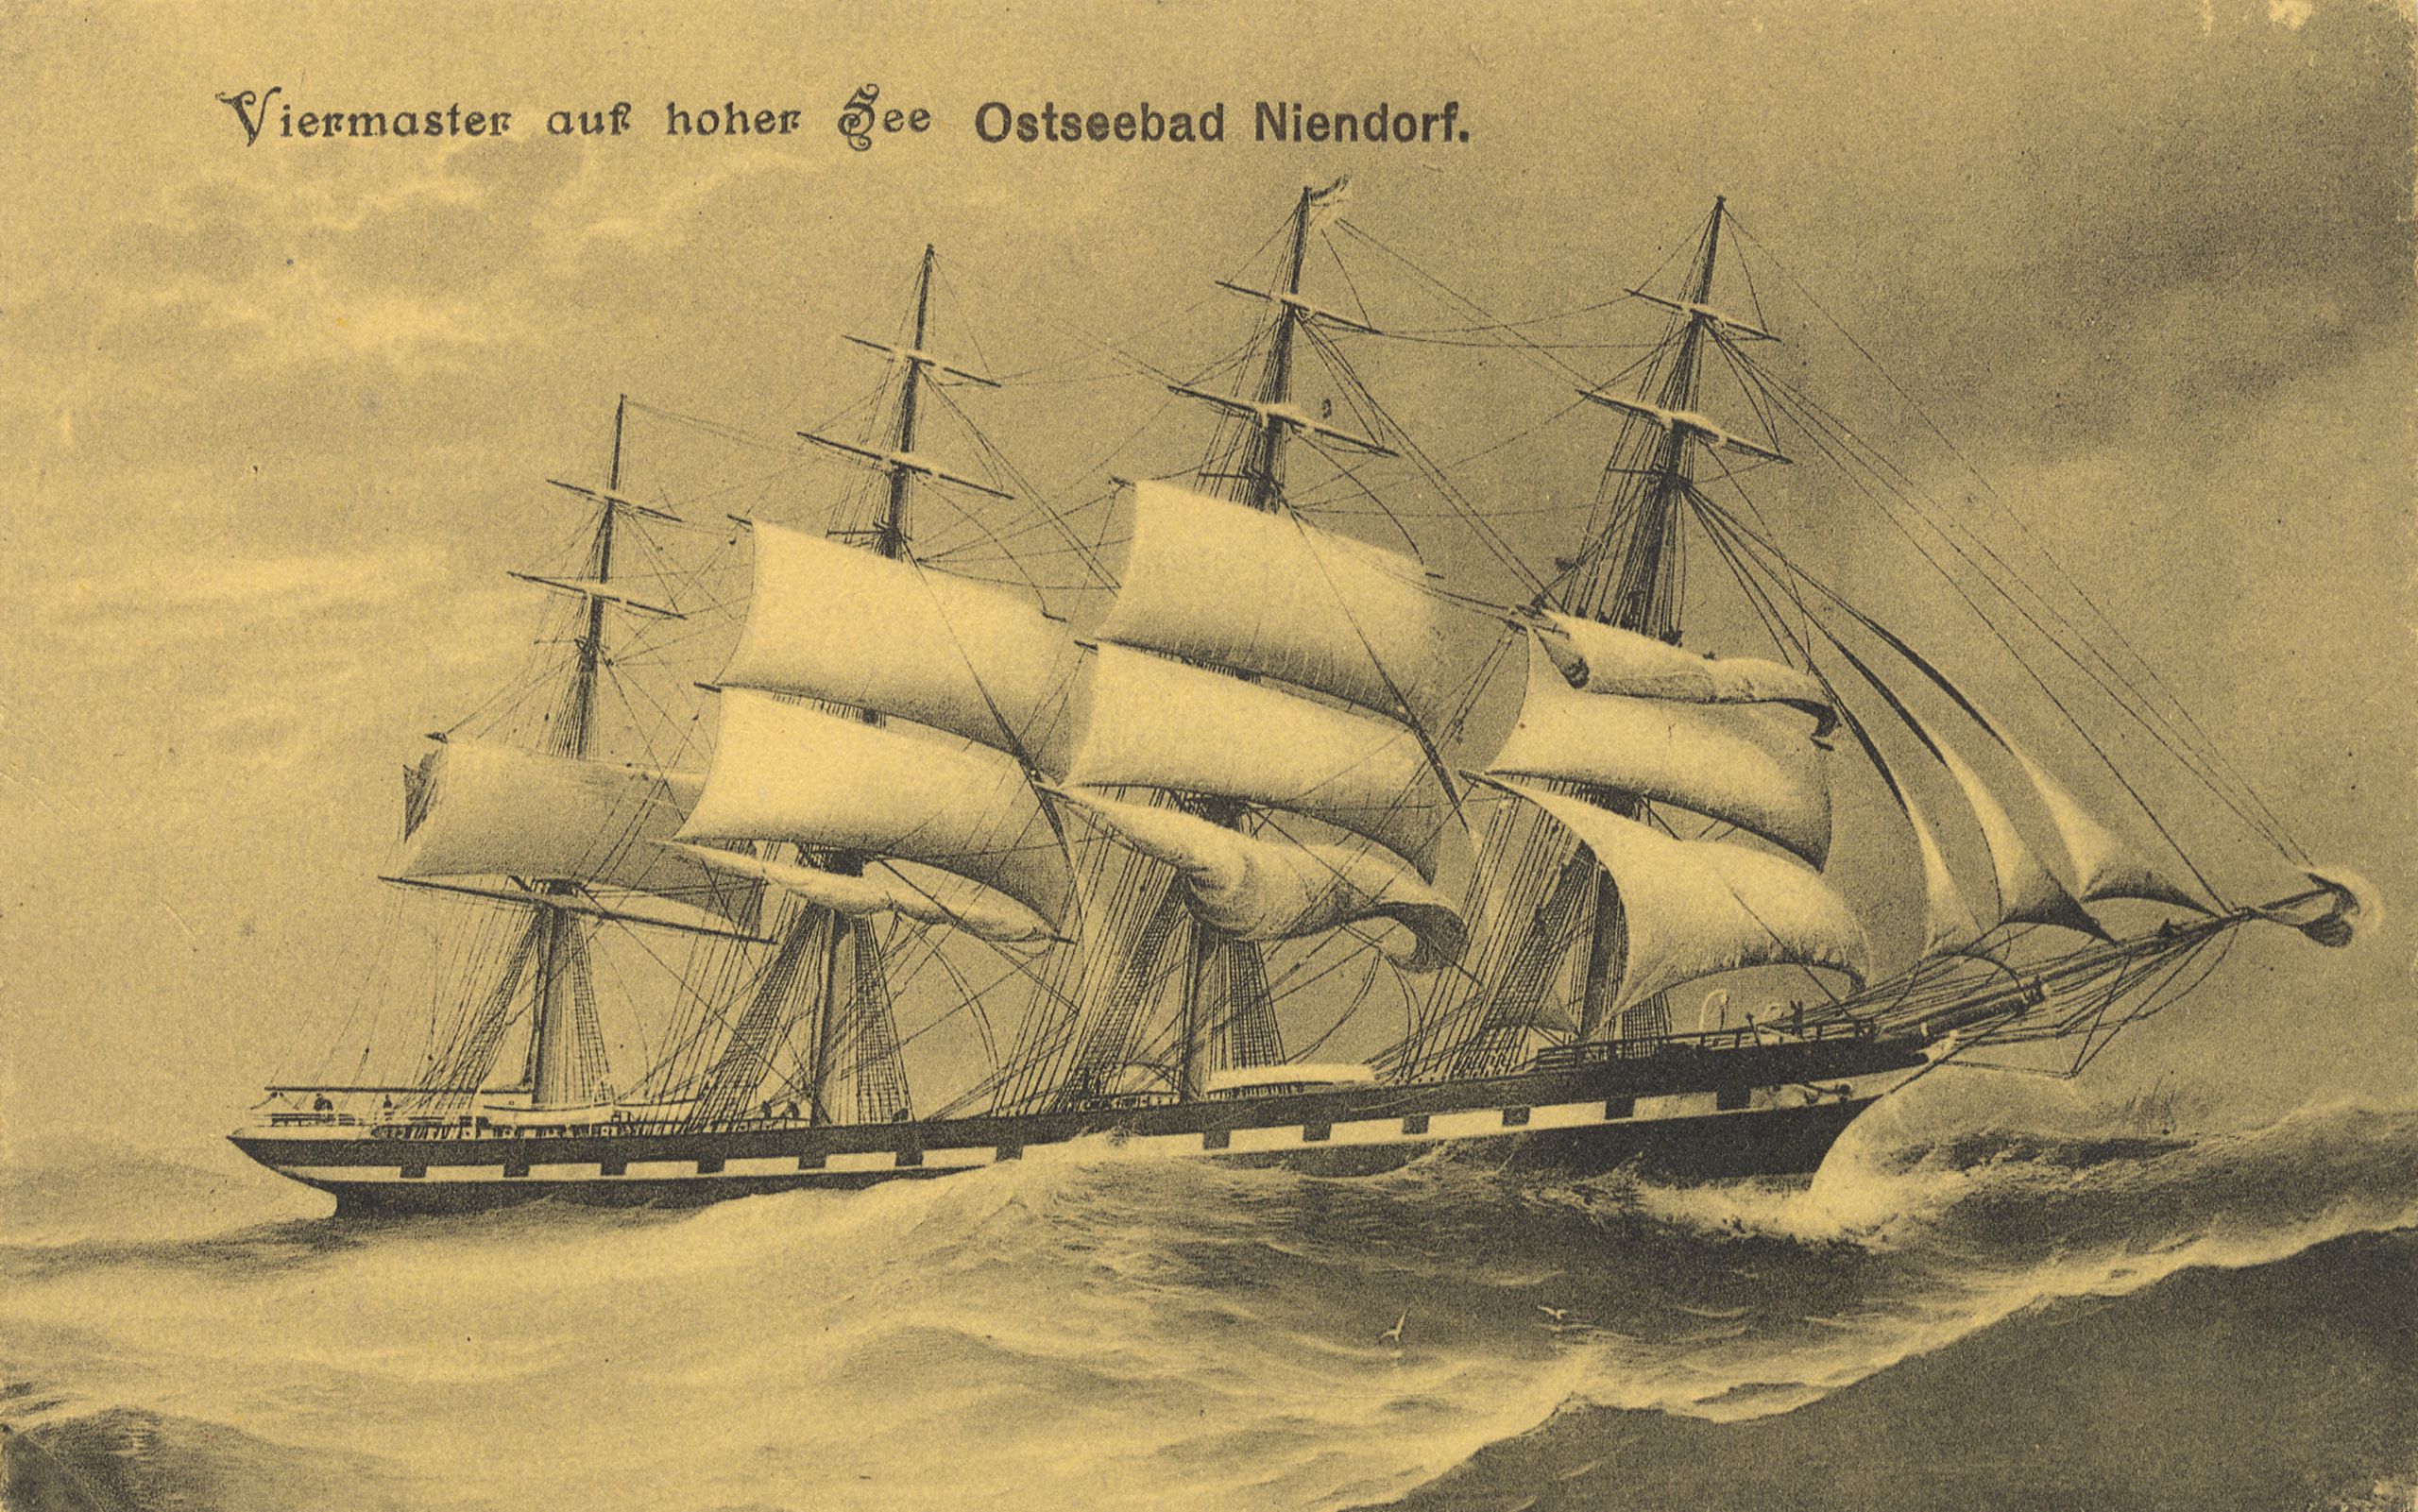 British four-masted and full-rigged ship